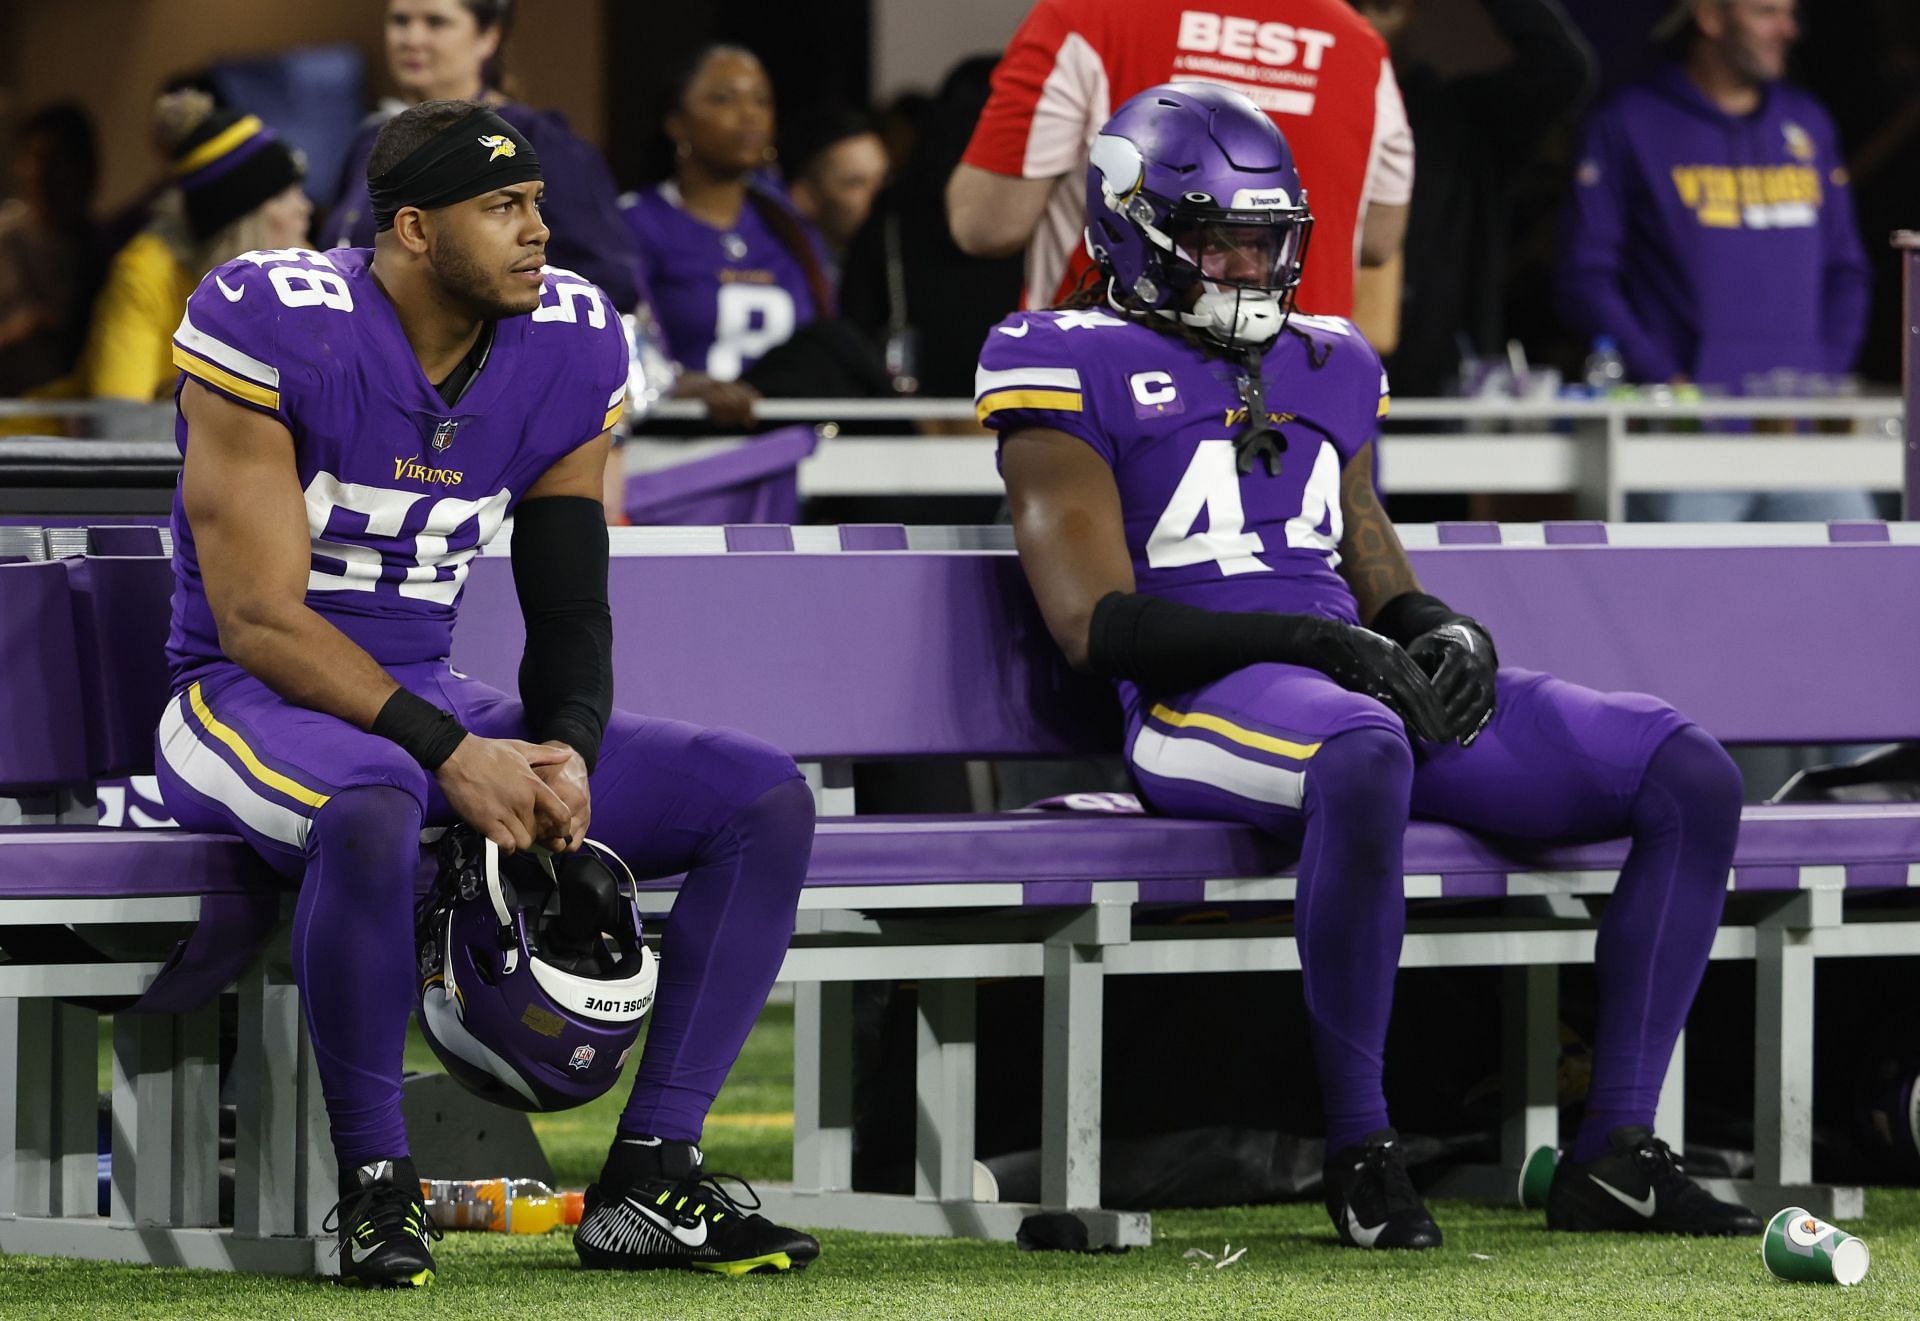 NFL fans roast Vikings after playoff loss at home to Giants